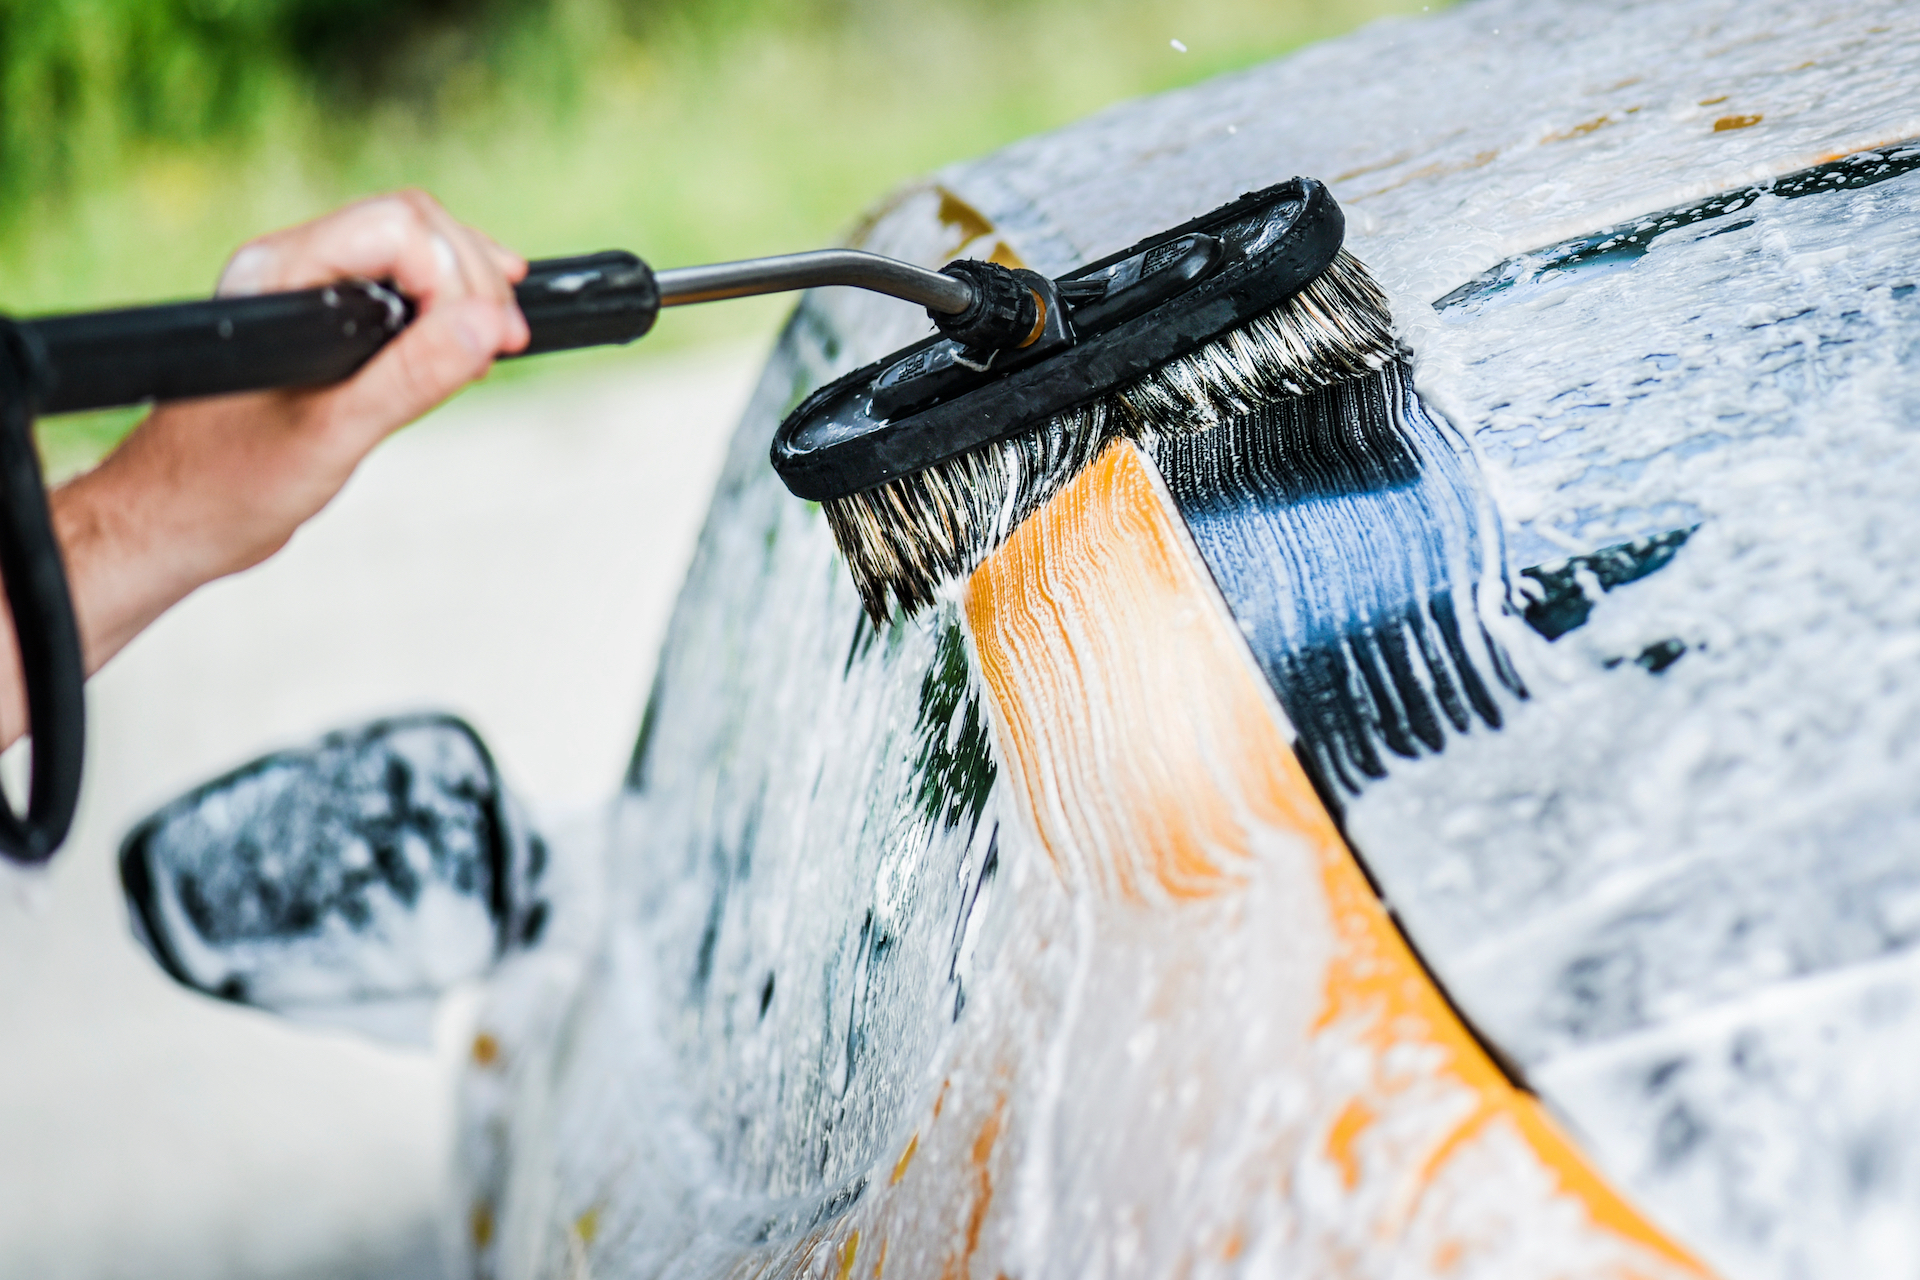 Car washing close up. Cleaning a car with foam brush and high pressure water.